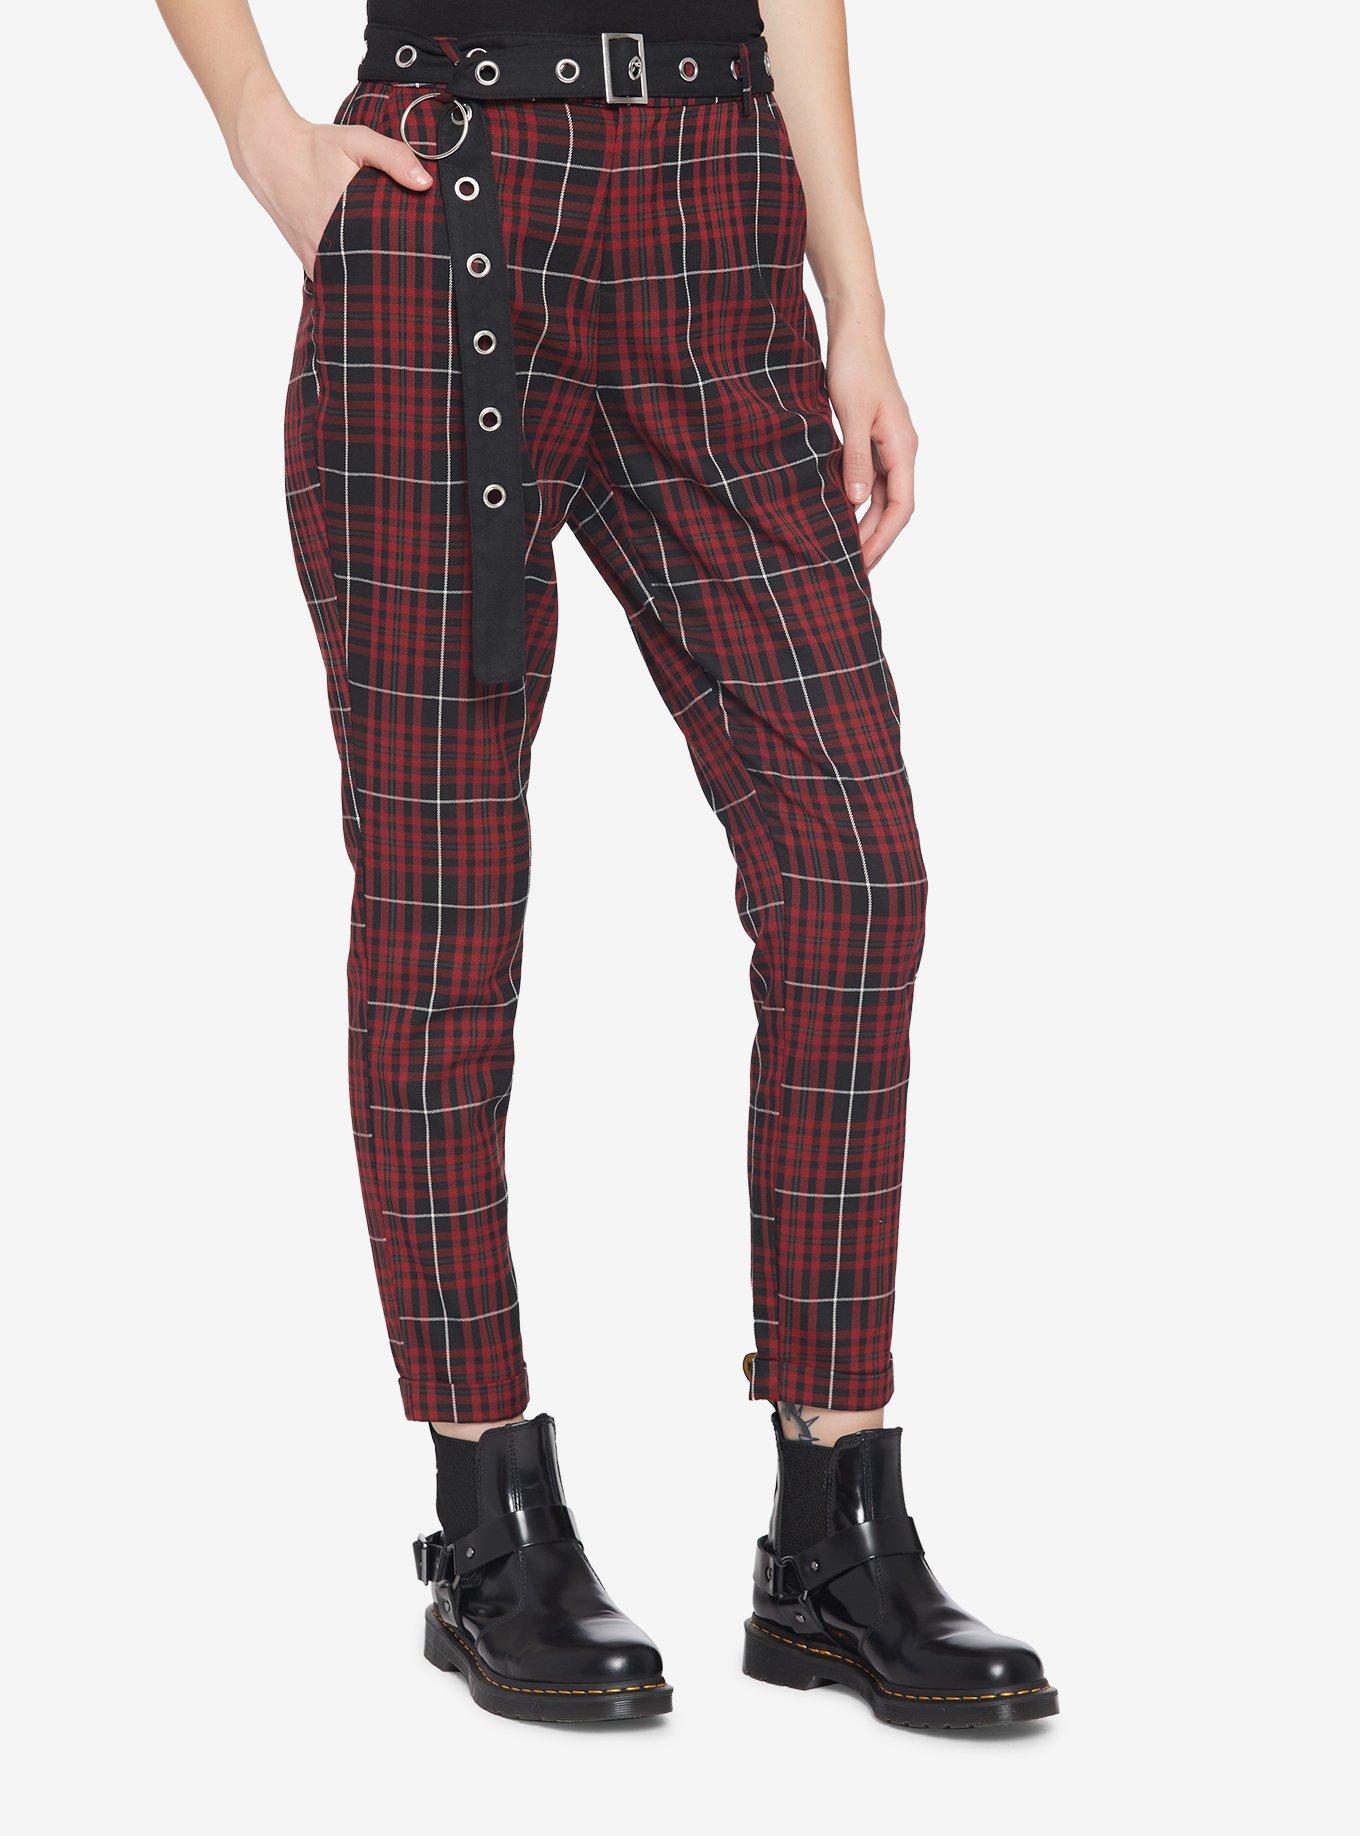 Hot Topic Womens Blue Plaid Suspender Pants Trouser Punk Cosplay Academia  XS 